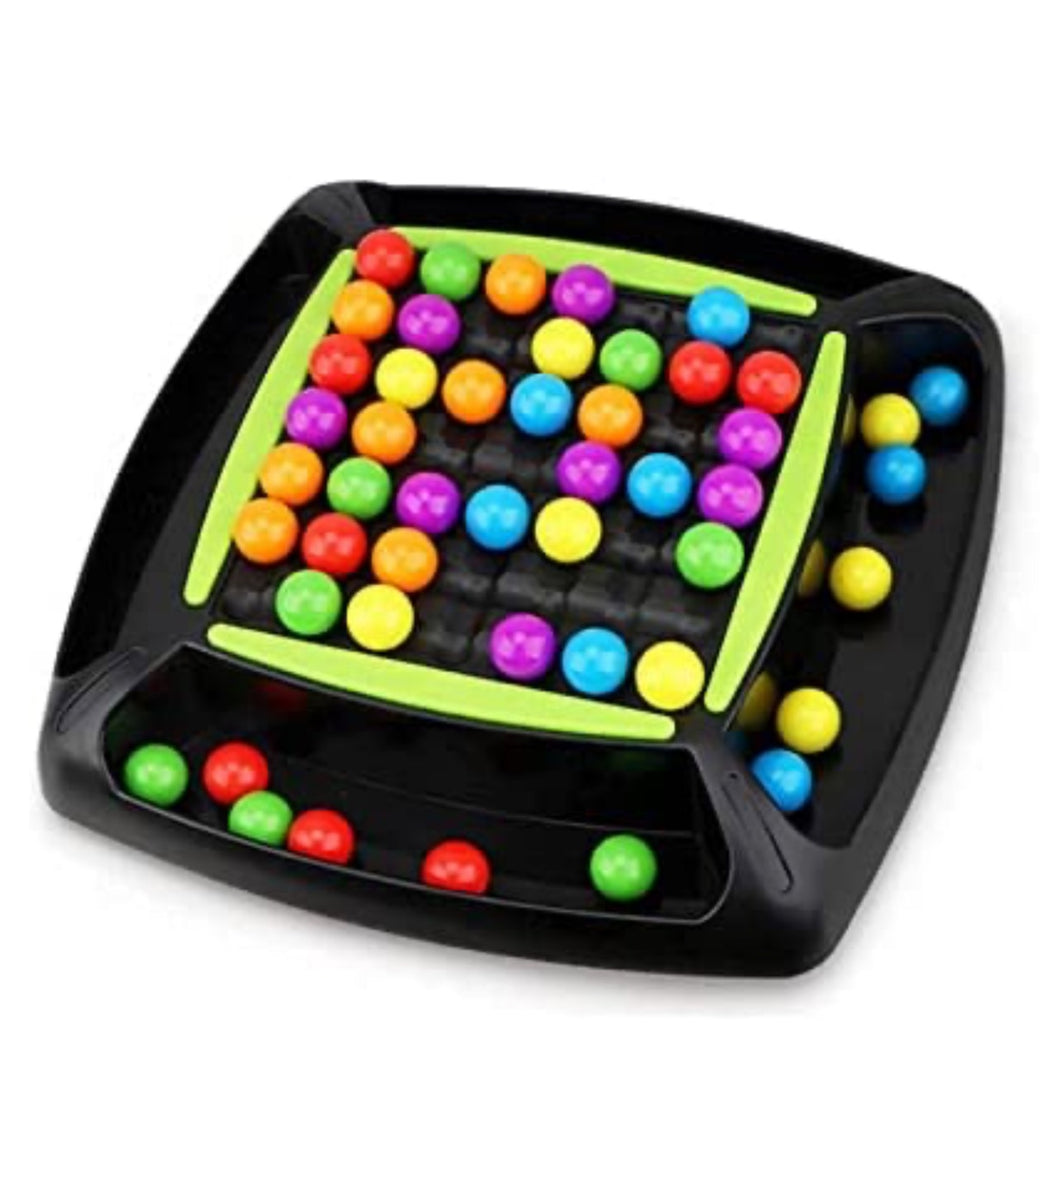 48 Colorfull Rainbow Ball Elimination Game Kid Parent Interaction Puzzle Magic Chess Family Game Toy Set Rainbow Ball Matching Game for Kid Adult to Play Together